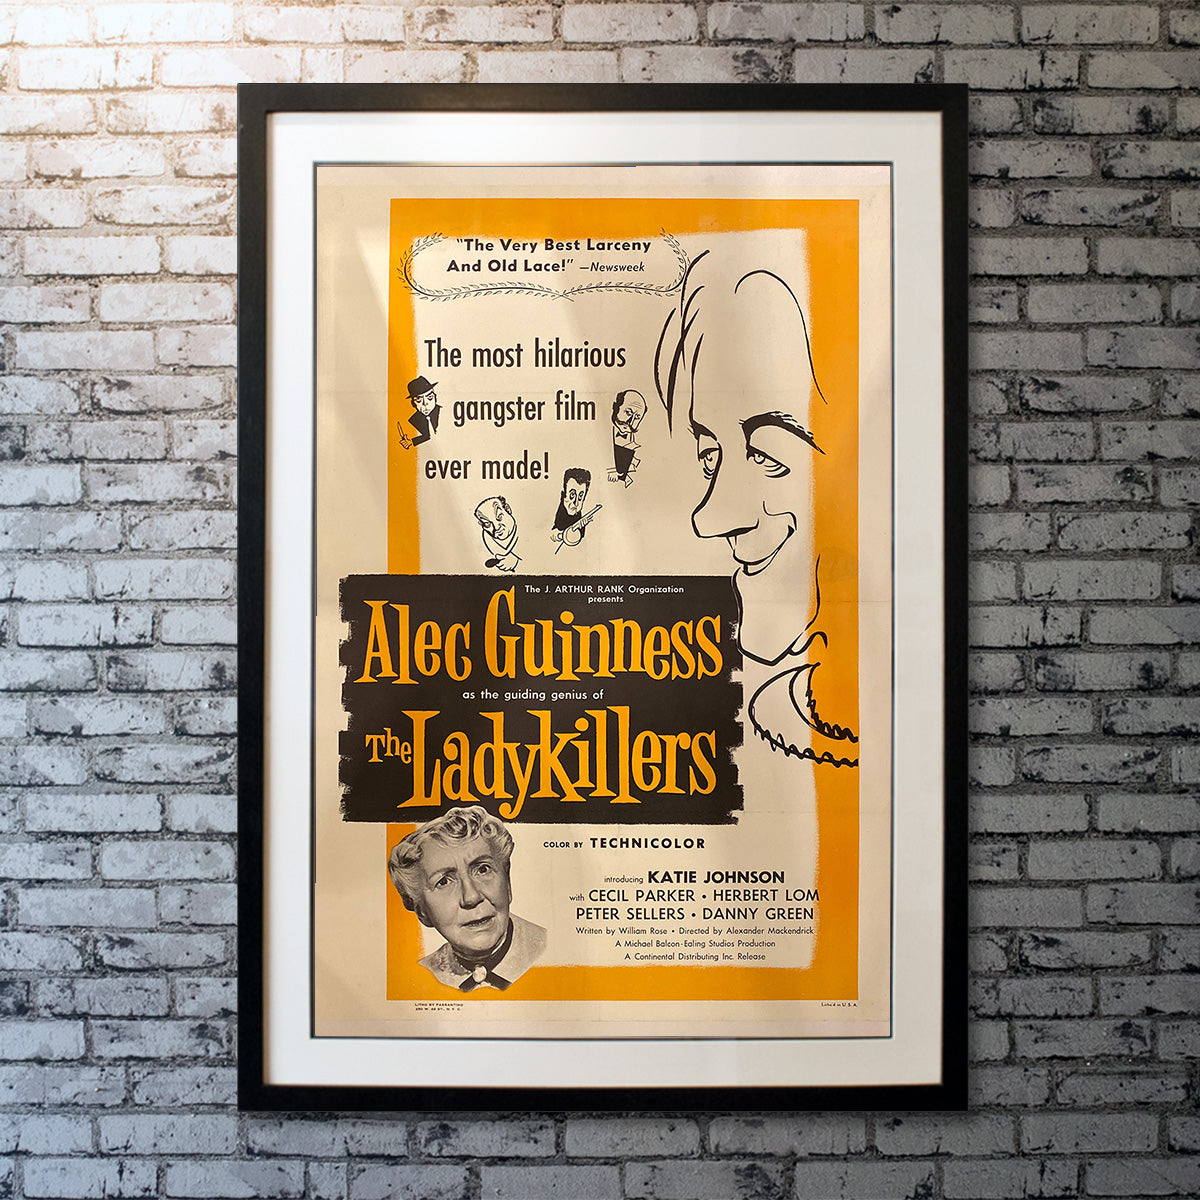 Original Movie Poster of Ladykillers, The (1955)